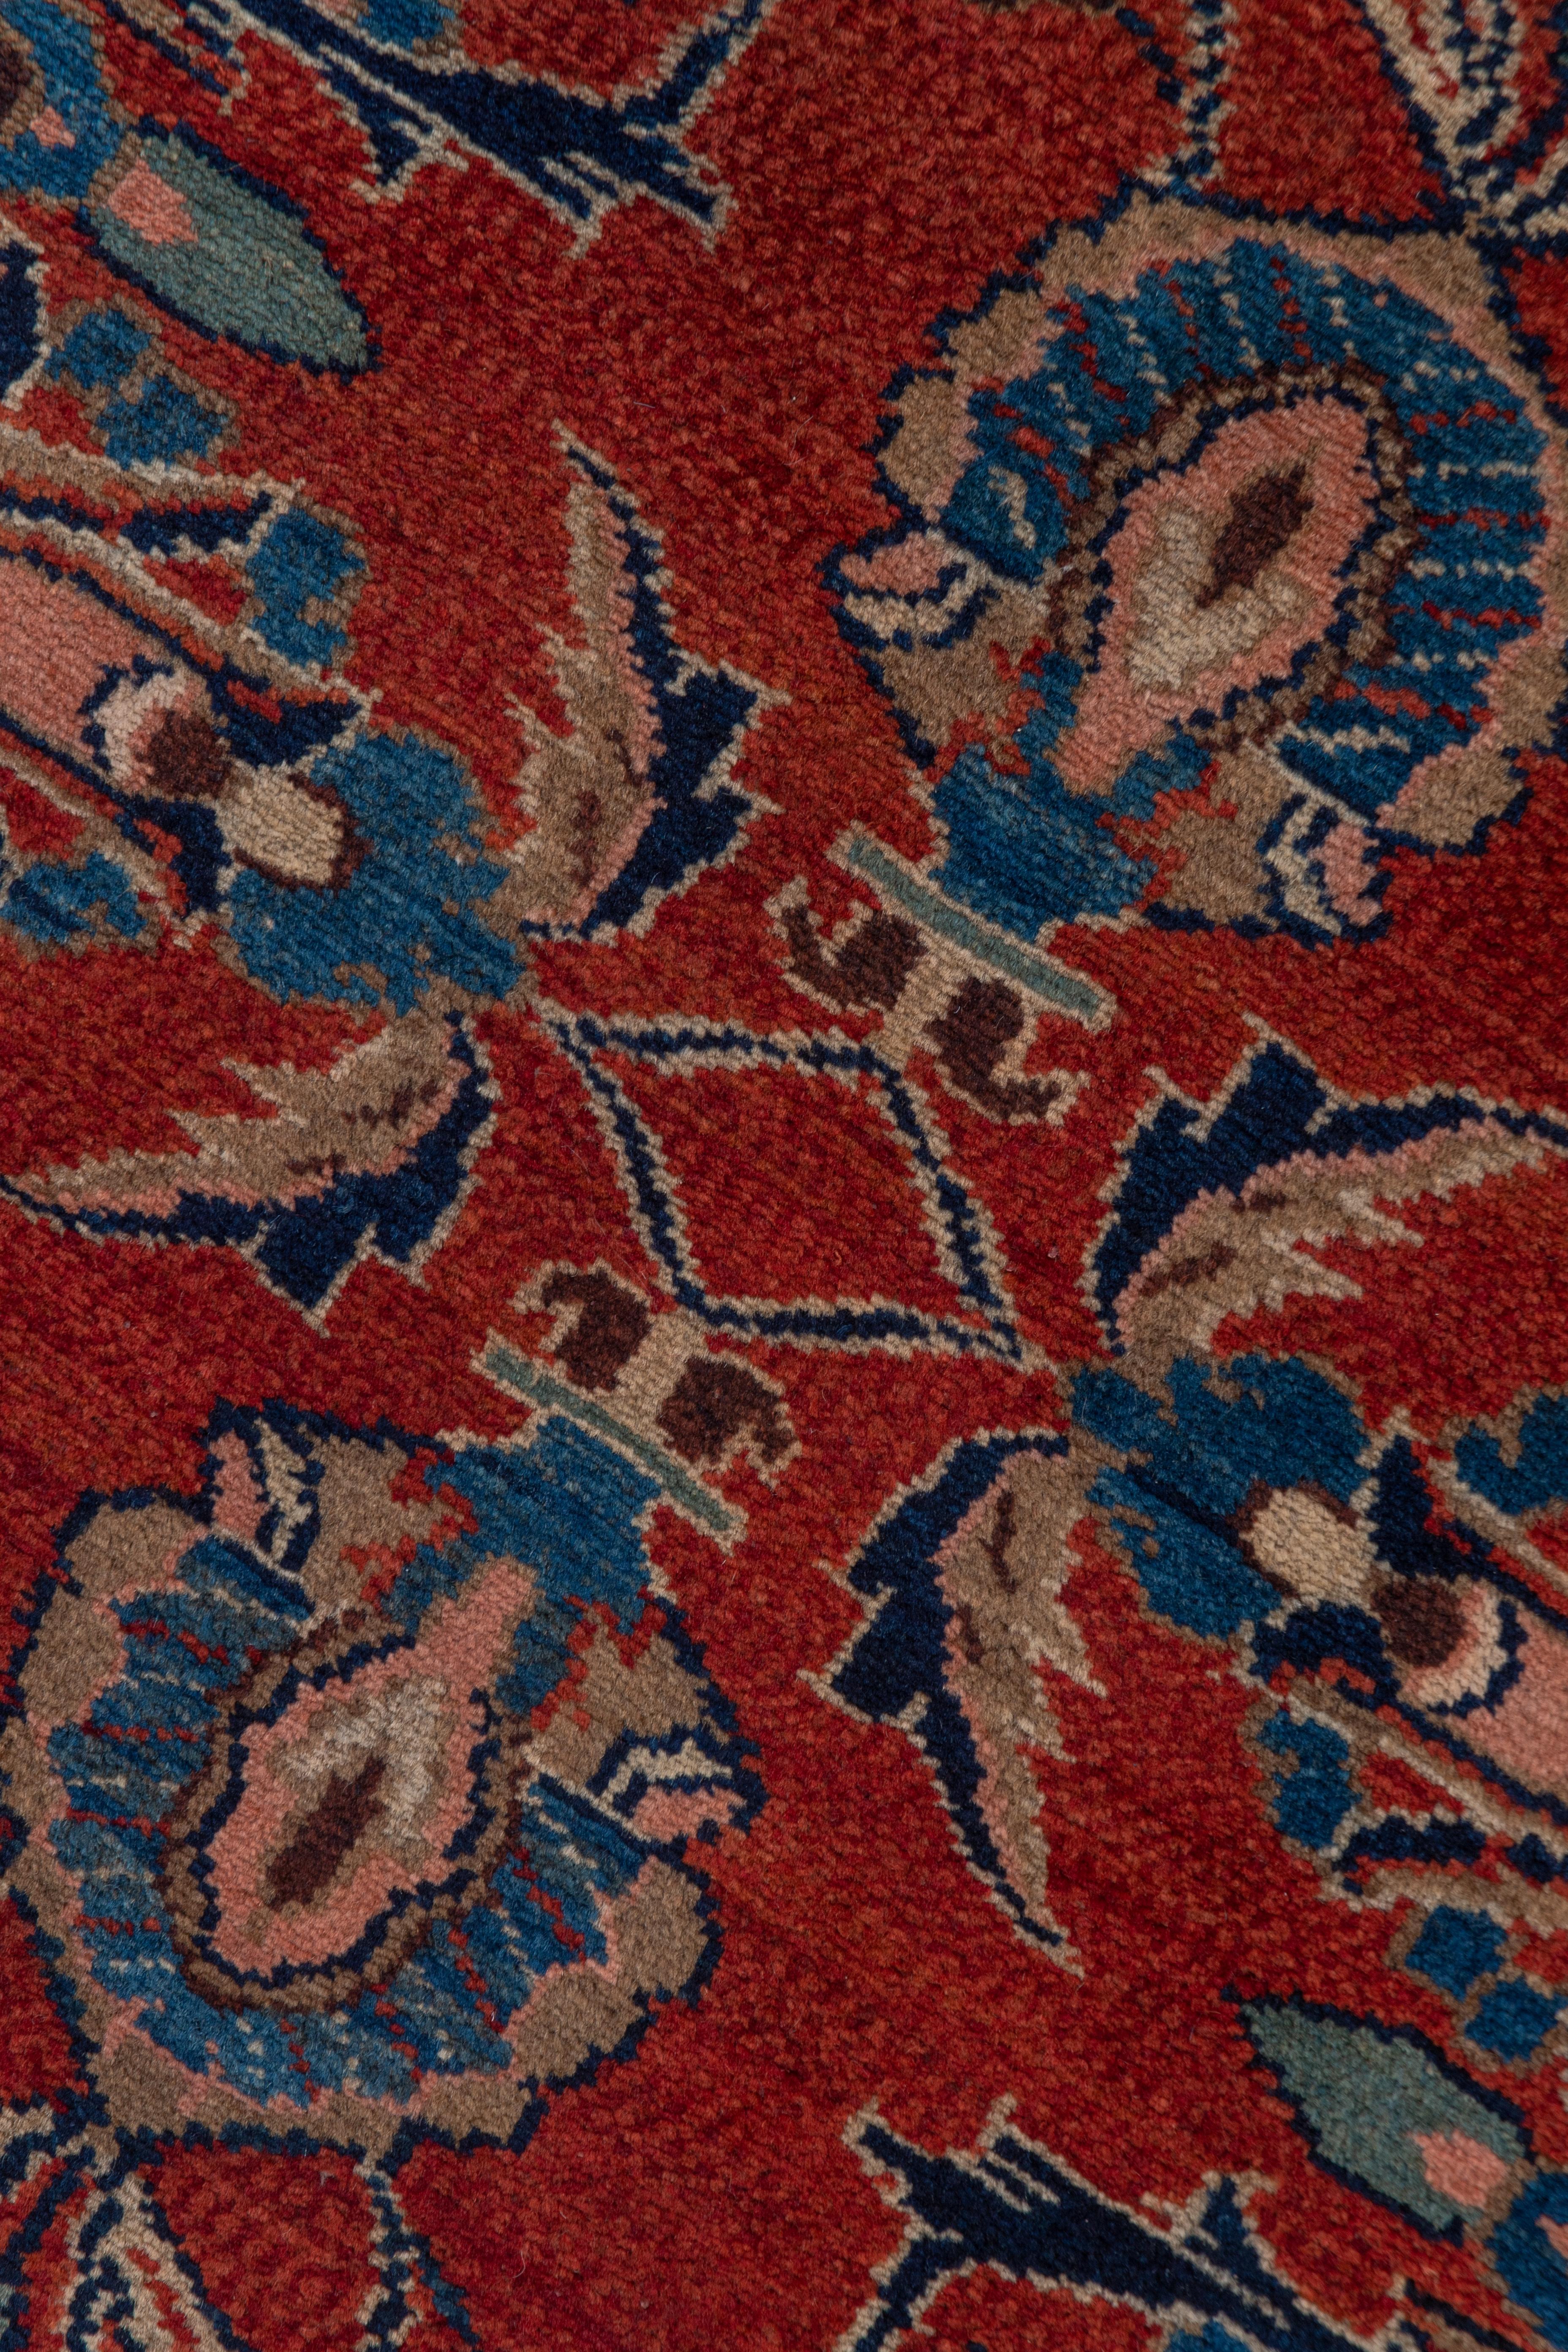 This semi-antique Hamadan area village runner features a cranberry scarlet field supporting a palmette and angular vine segment design in one column, detailed in navy, royal blue, ivory, green and pink. The dark blue narrow main border shows a